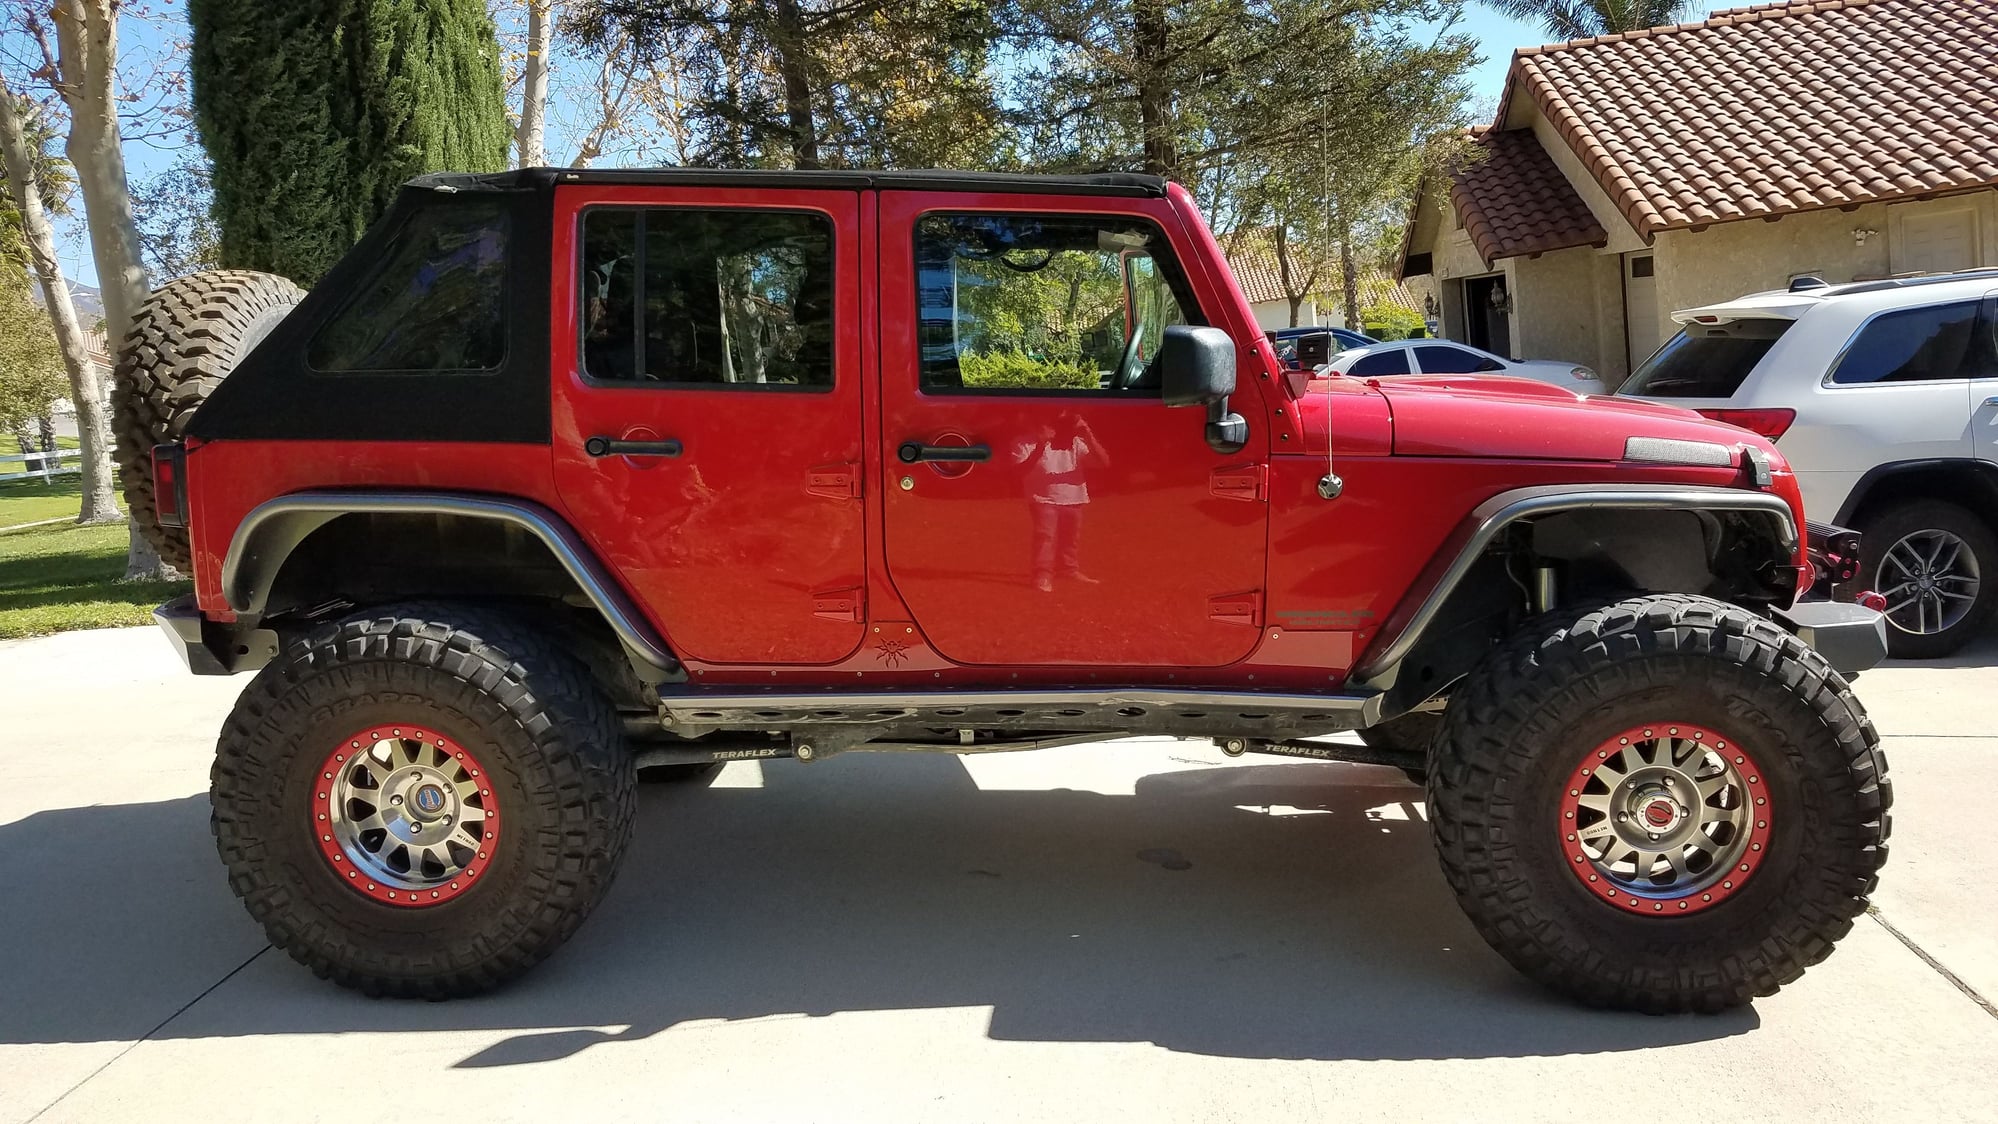 2012 Jeep Wrangler - Jeep Wrangler JKU with Currie RJ 60's, Leather , Long arm etc. - Used - VIN 1C4BJWDG3CL238654 - 52,500 Miles - 6 cyl - 4WD - Automatic - Red - Rancho Cucamonga, CA 91737, United States